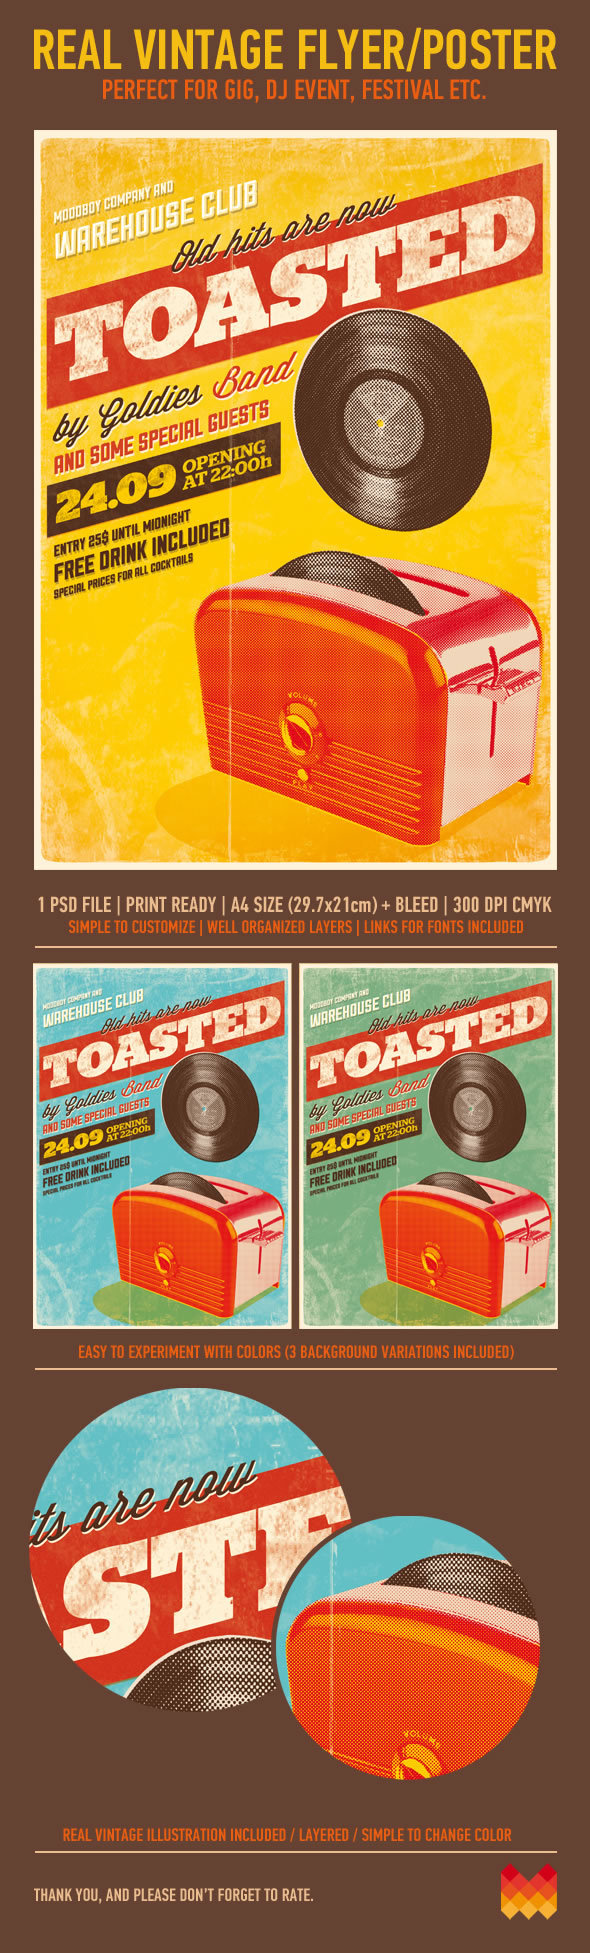 http://www.behance.net/gallery/Toasted-Vintage-Poster-PSD/5357923